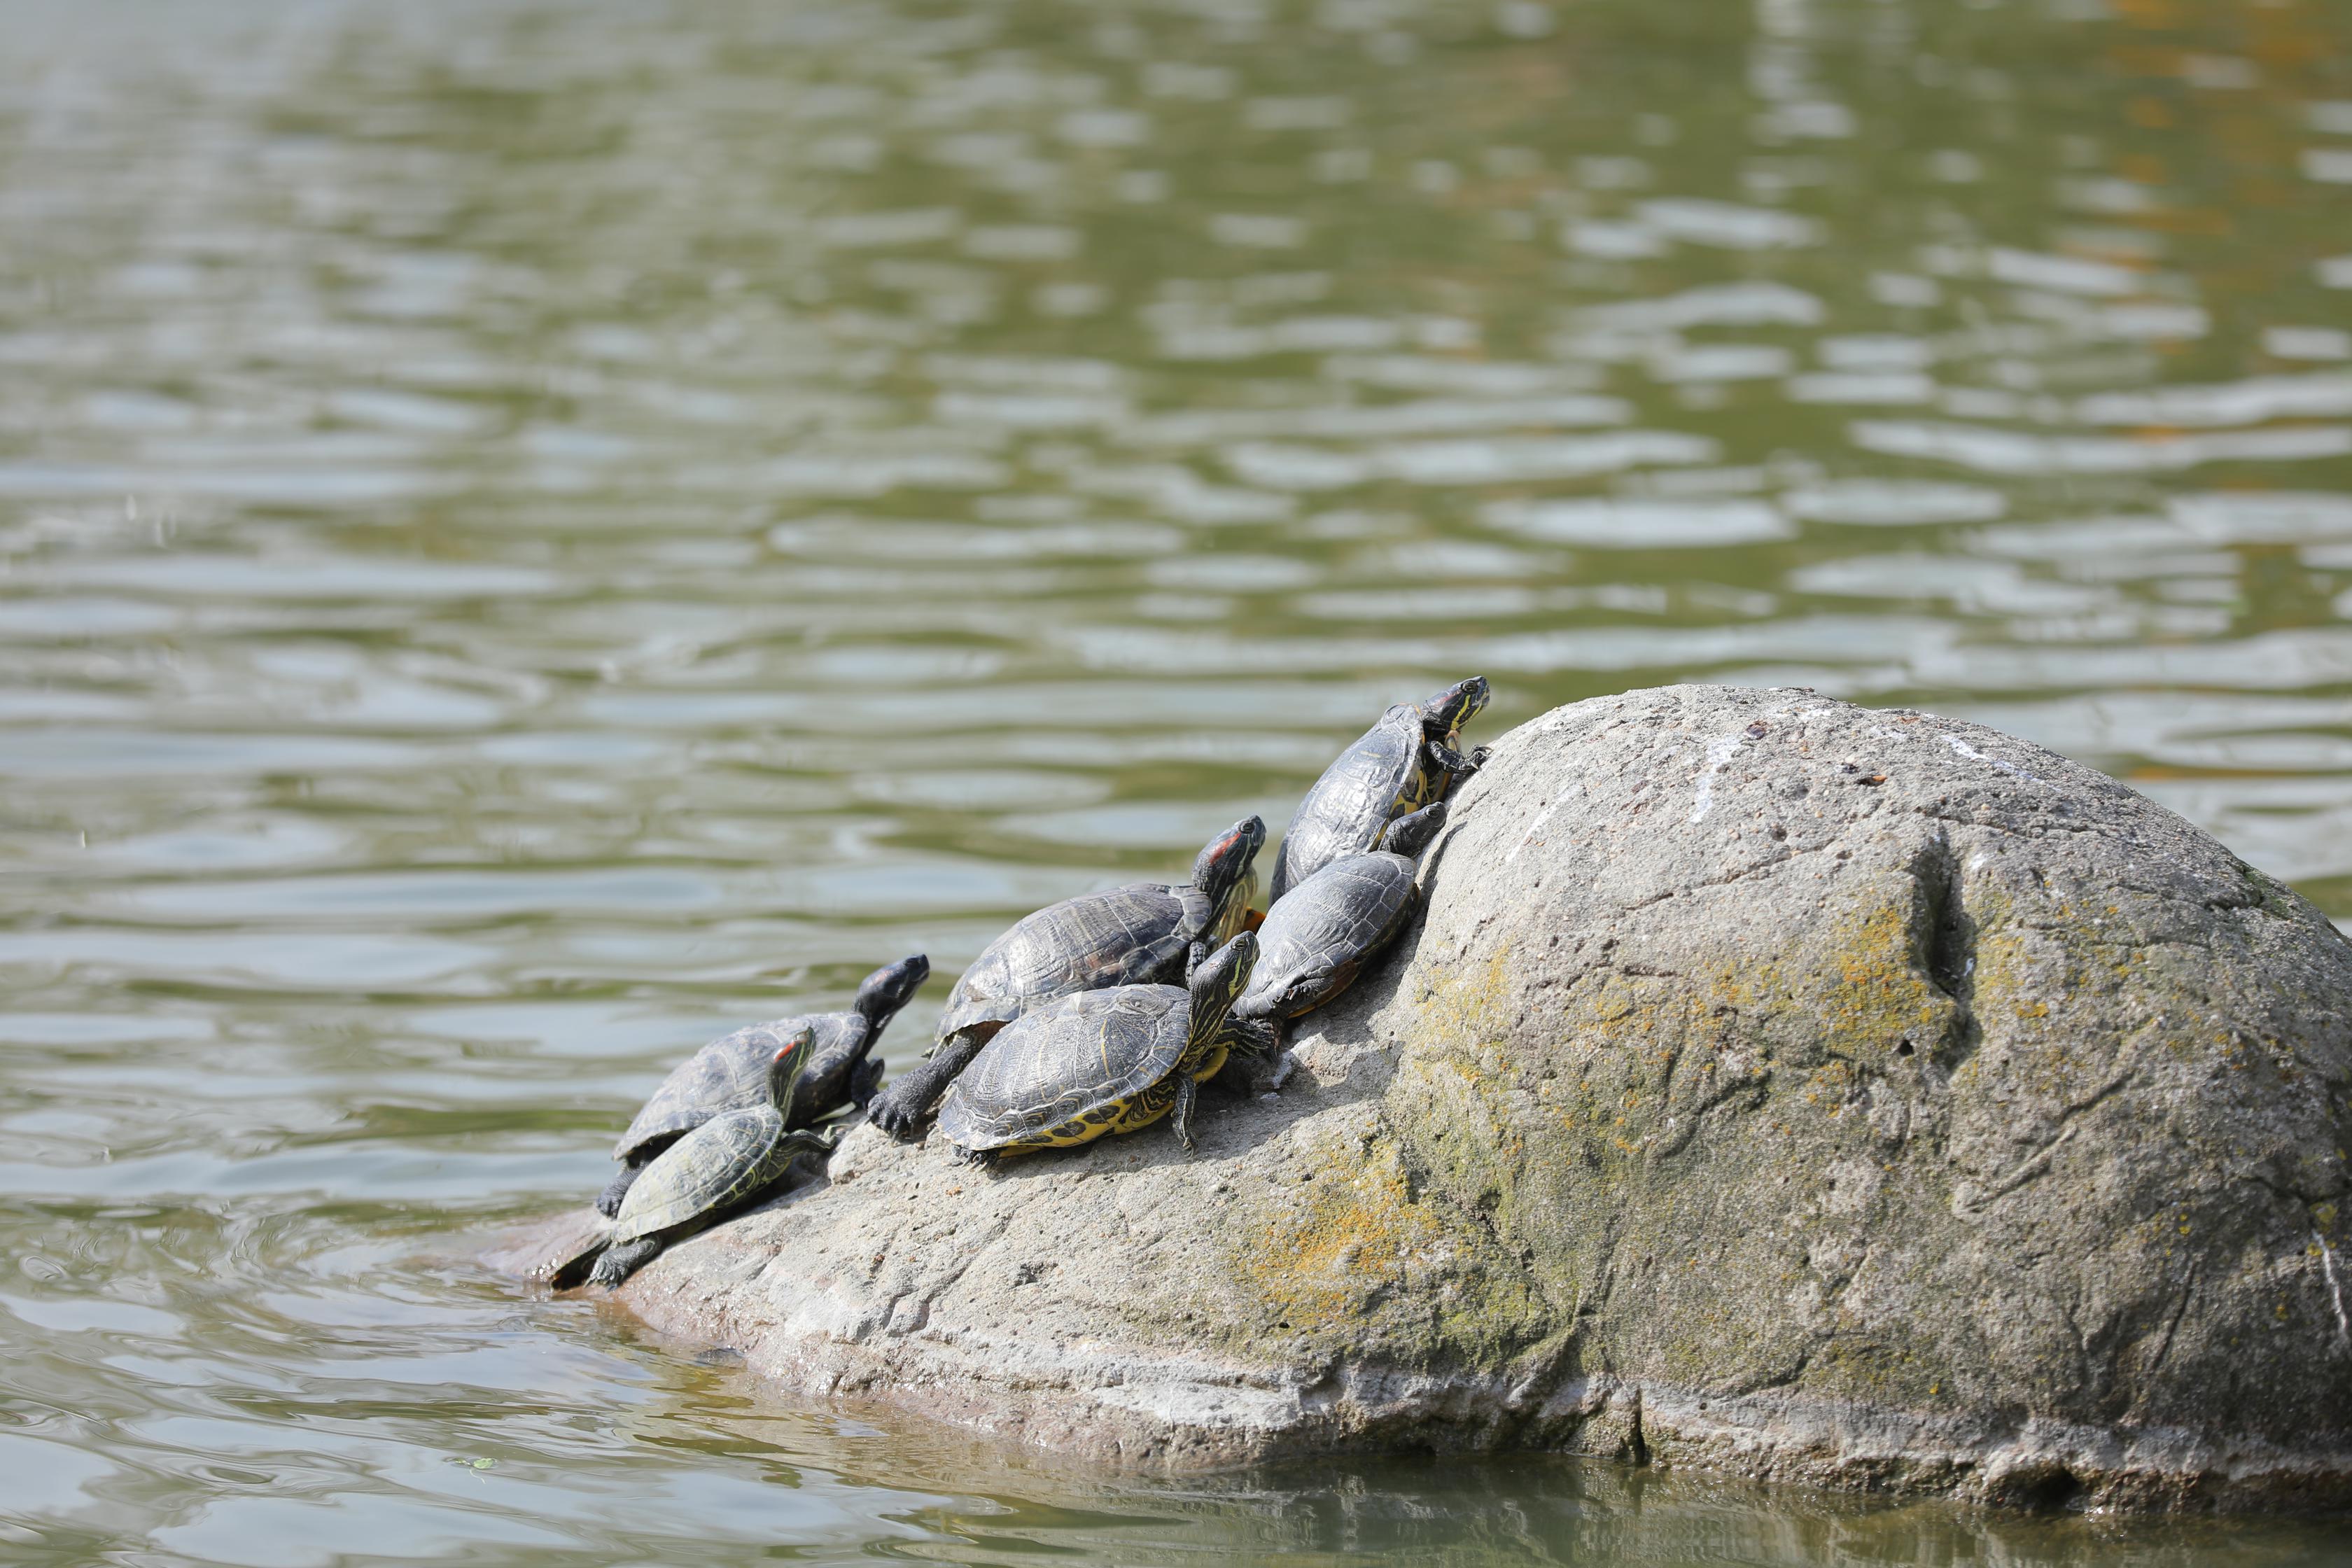 Know about turtles yawning